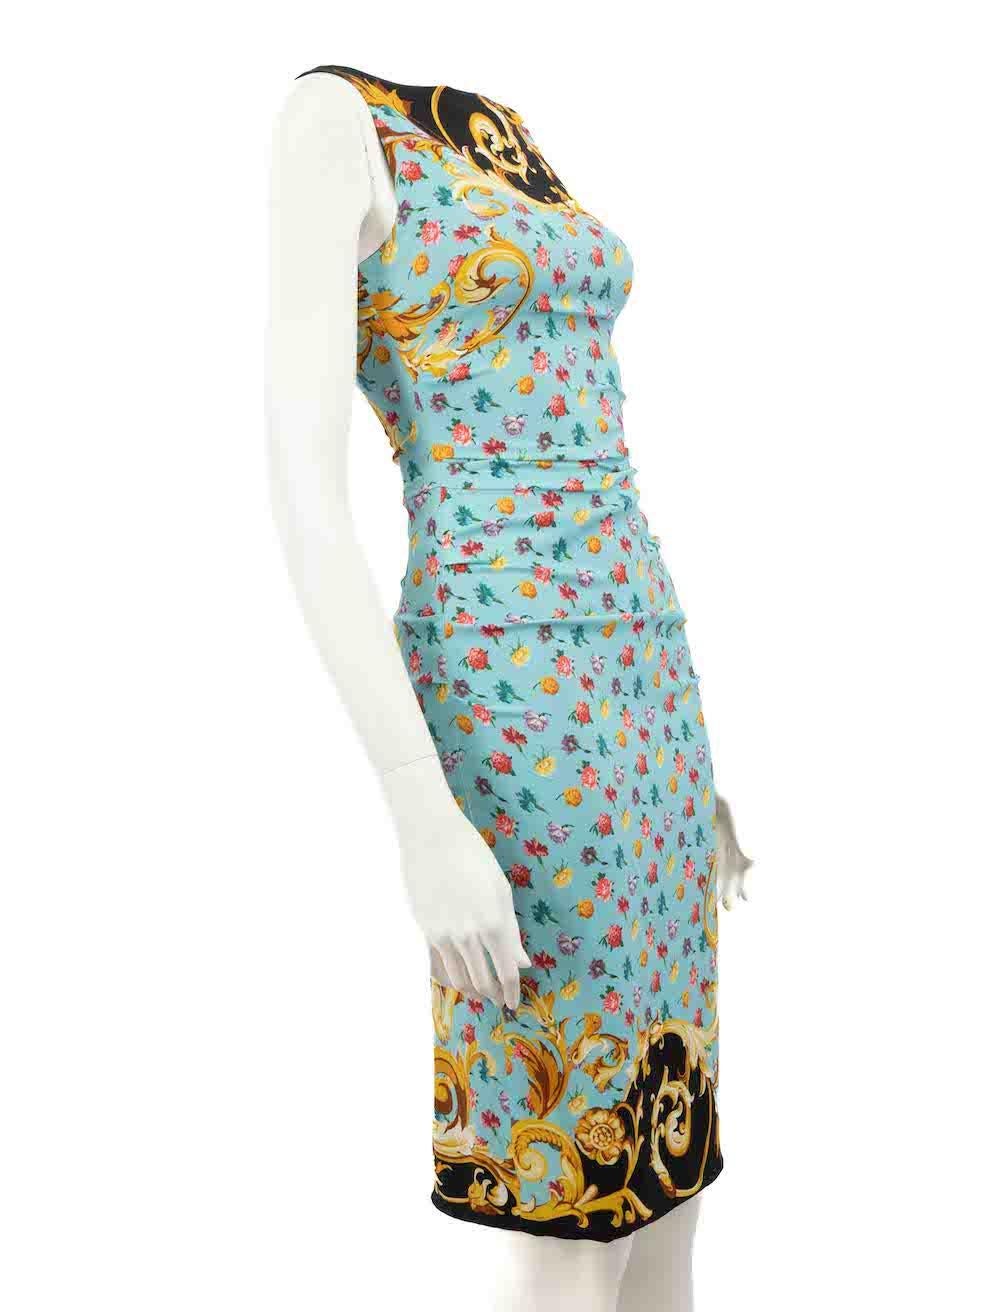 CONDITION is Very good. Minimal wear to dress is evident. Minimal wear to the front hem with pulls to the weave on this used Dolce & Gabbana designer resale item.
 
 Details
 Blue
 Silk
 Knee length dress
 Baroque floral pattern
 Ruched accent
